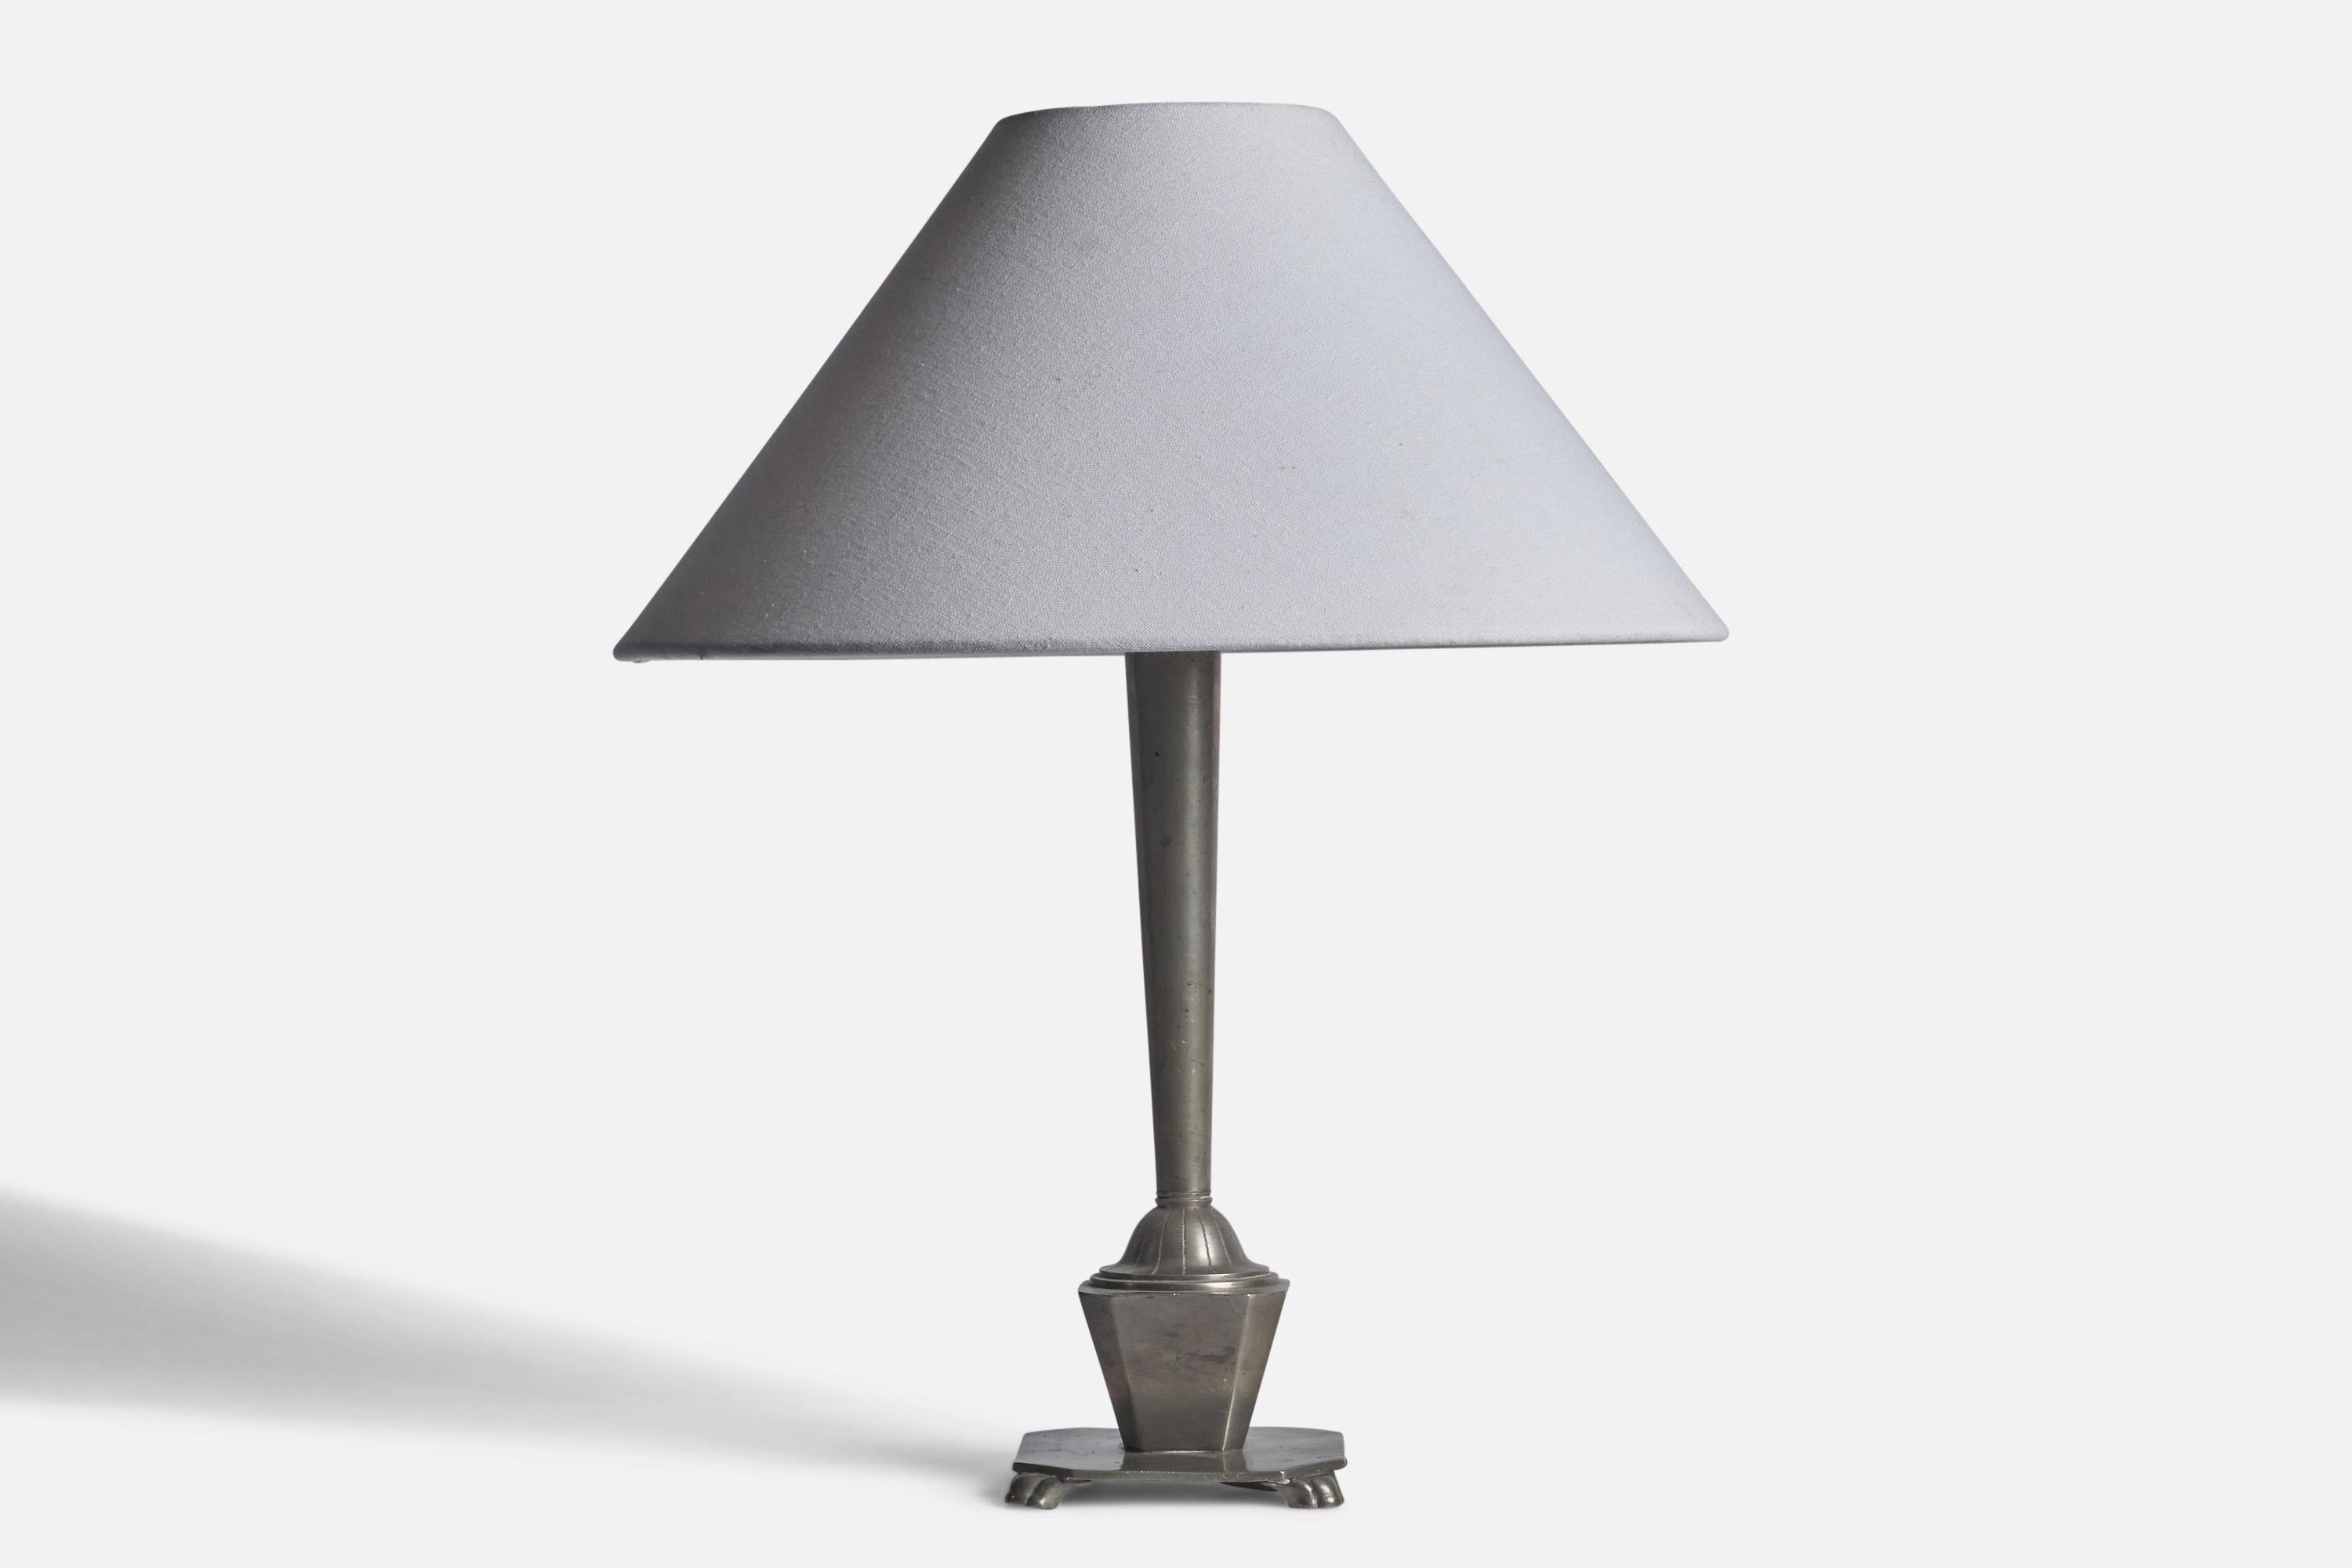 A pewter table lamp designed and produced in Sweden, 1930s.

Dimensions of Lamp (inches): 15” H x 4.75” W x 4.75” D
Dimensions of Shade (inches): 4.5” Top Diameter x 15.75” Bottom Diameter x 9.25” H 
Dimensions of Lamp with Shade (inches): 19.5” H x